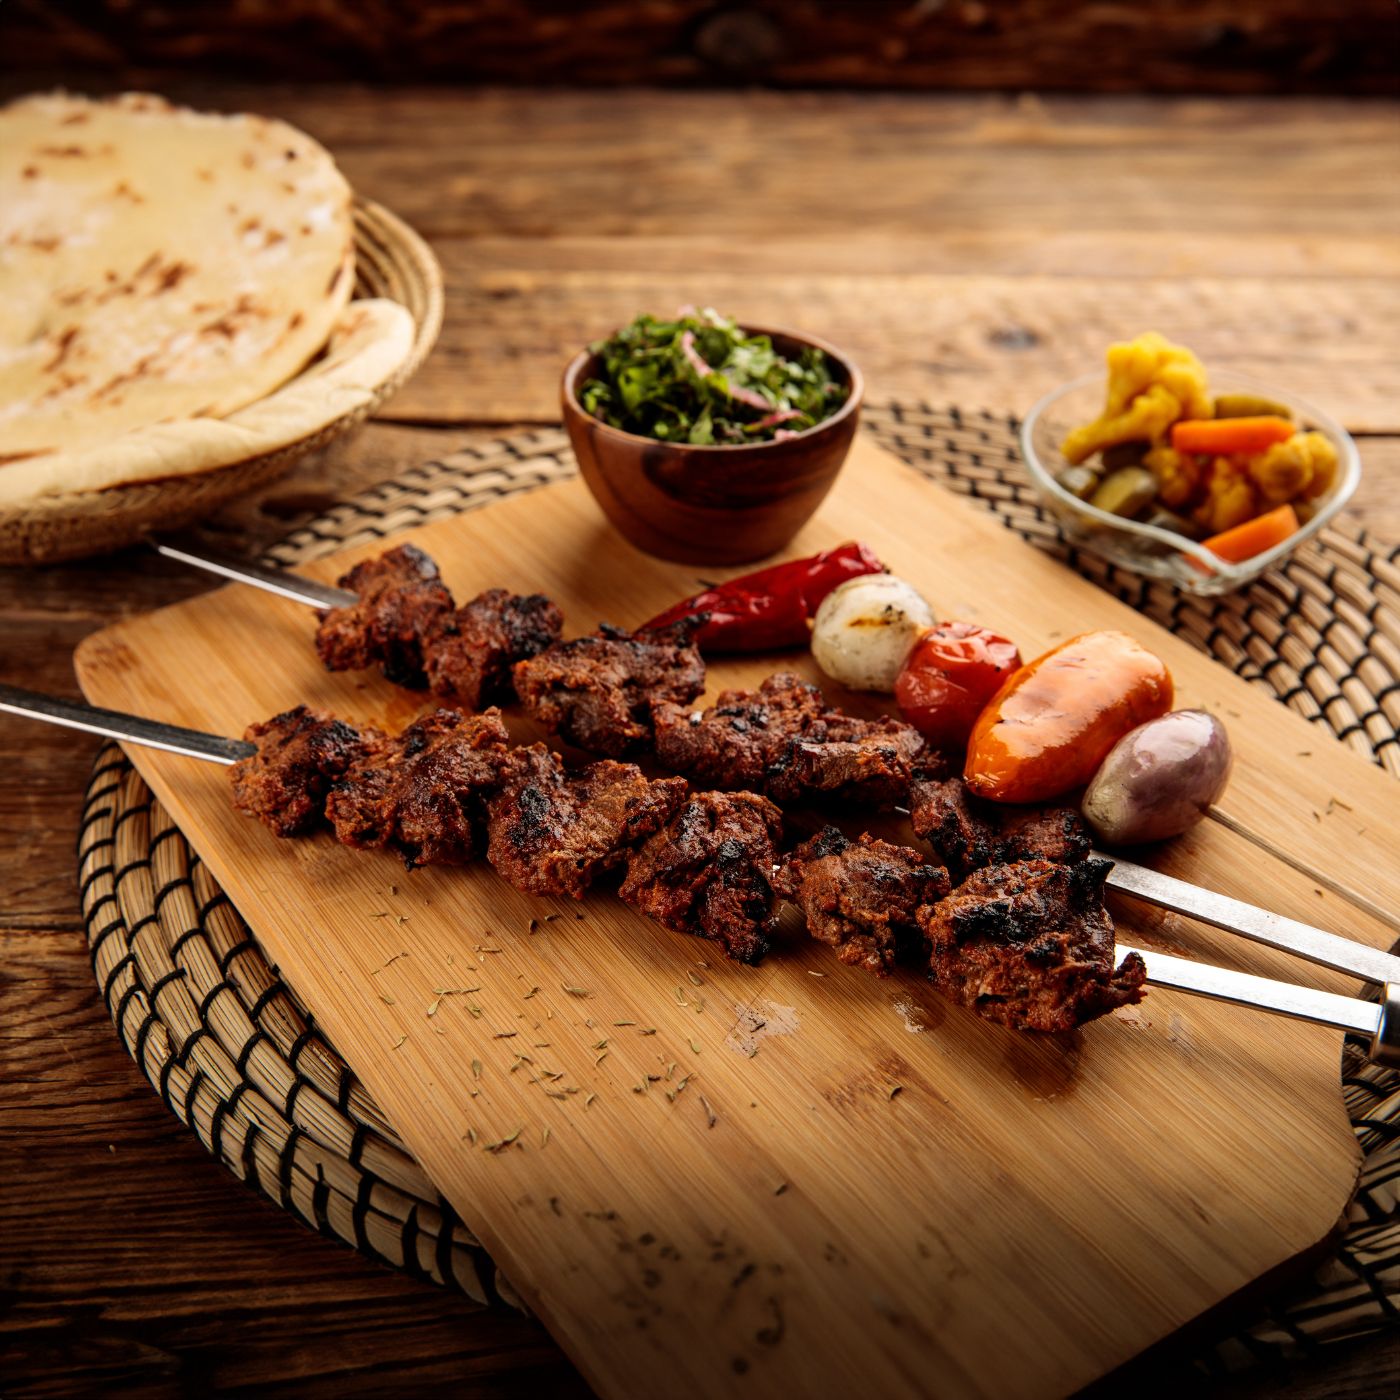 Shish-Kebab-or-beef-seekh-boti-served-in-a-wooden-cutting-board-isolated-on-wooden-background-side-view-1408897423_2125x1416 square.jpeg